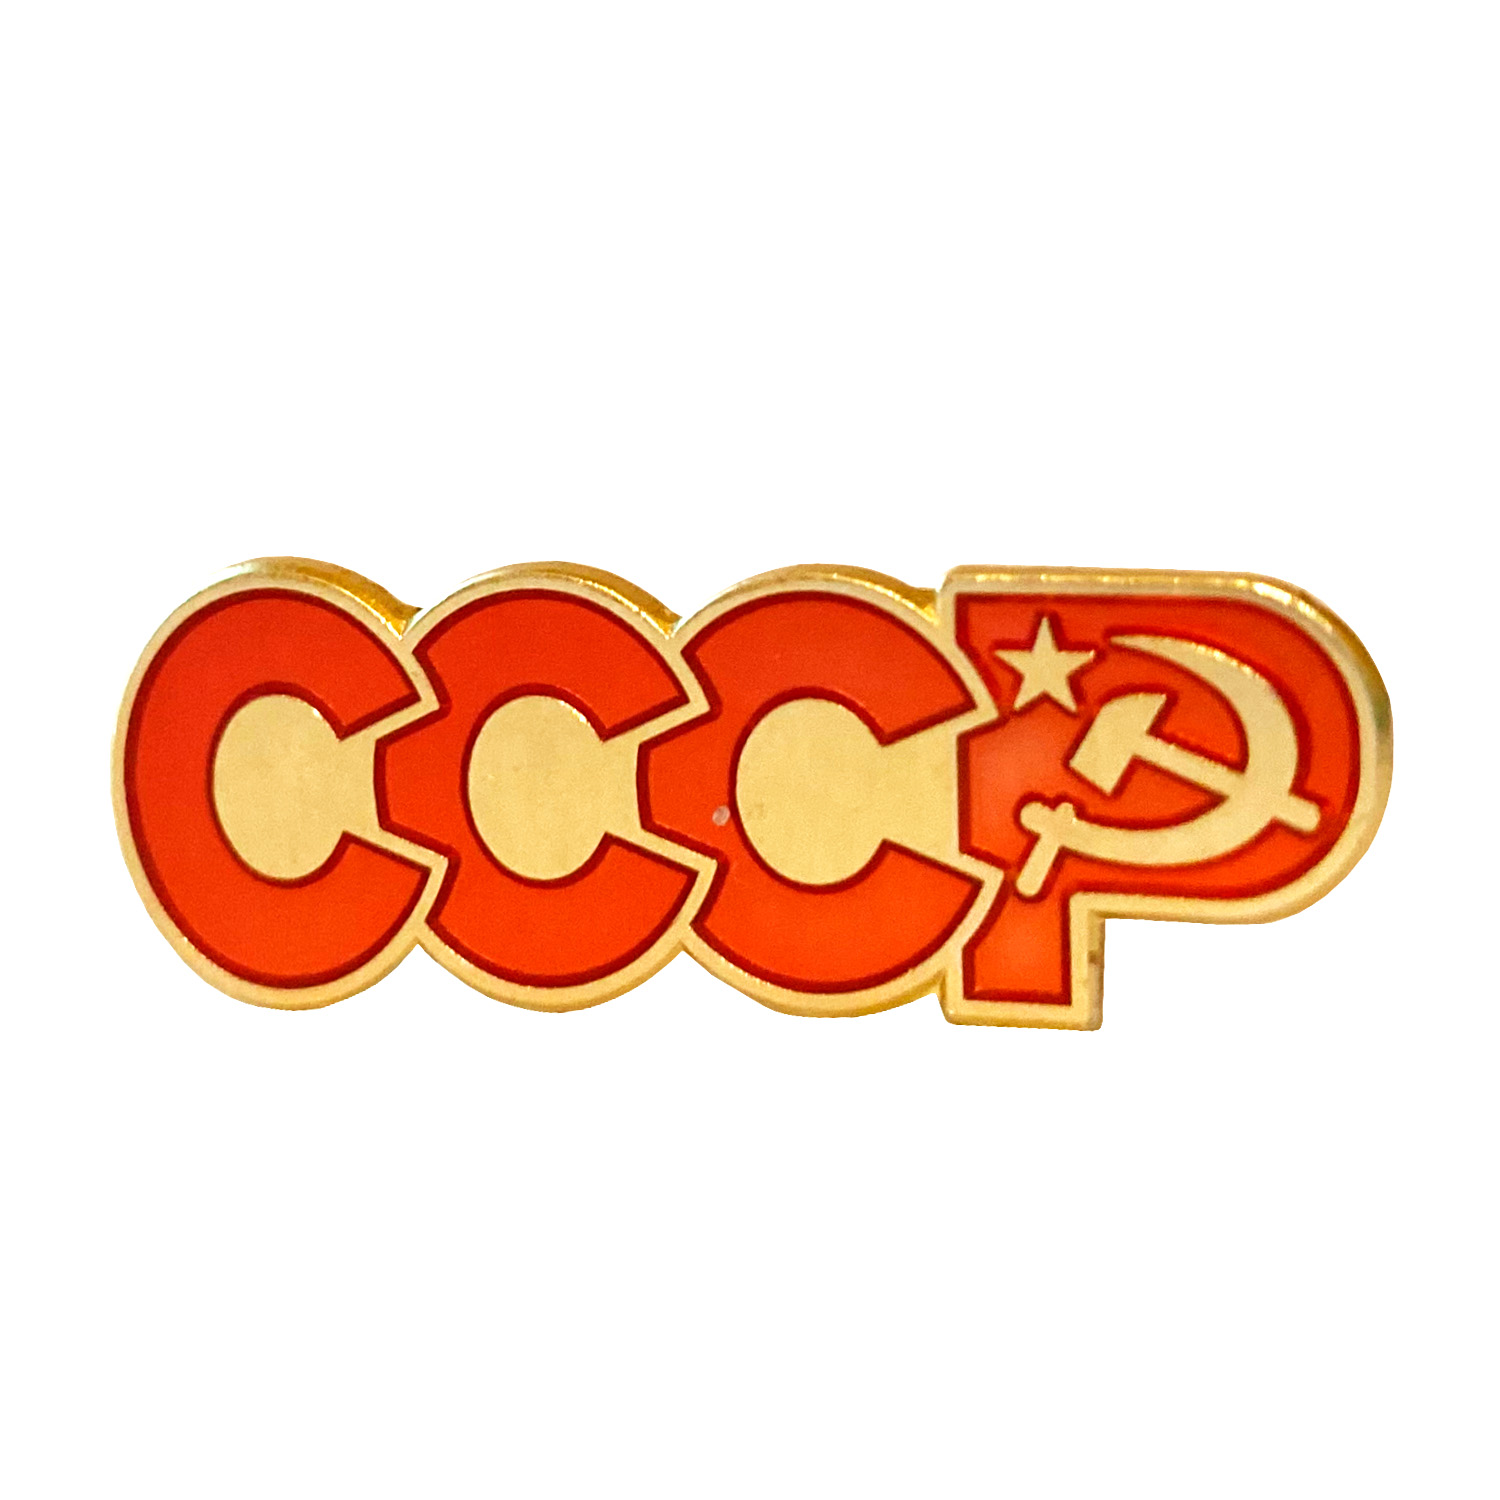 USSR Badge with Hammer and Sickle